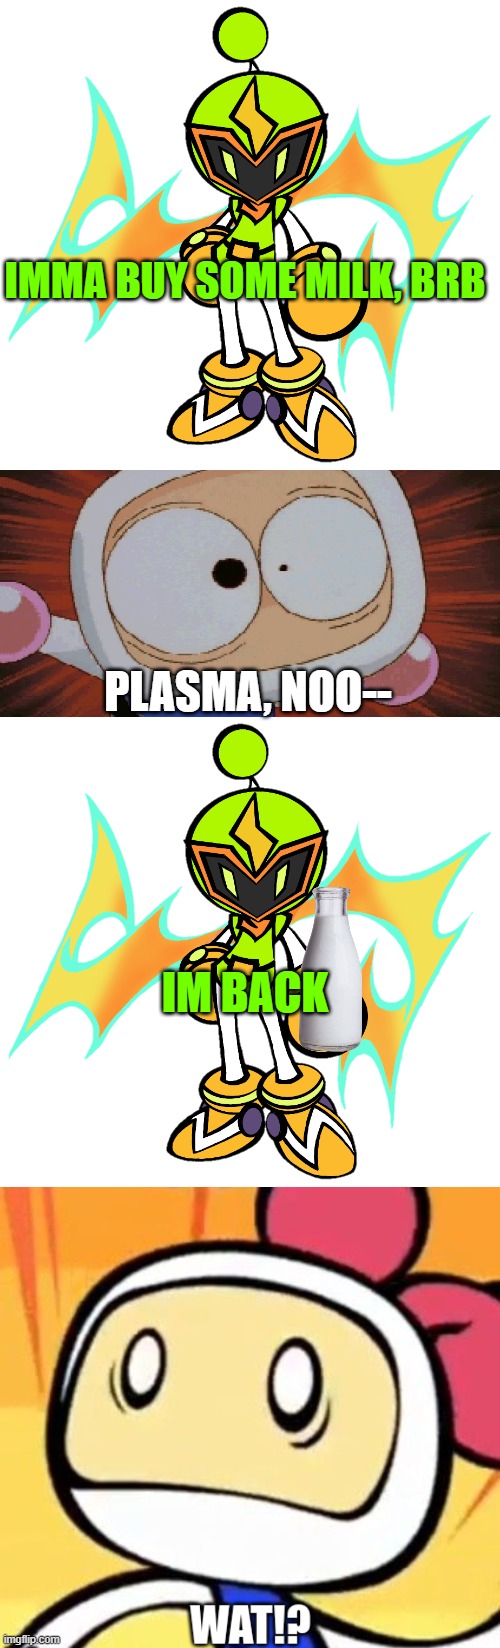 Buy some meelk for White | IMMA BUY SOME MILK, BRB; PLASMA, NOO--; IM BACK | image tagged in plasma bomber,white bomber scared,white bomber wat,bomberman | made w/ Imgflip meme maker